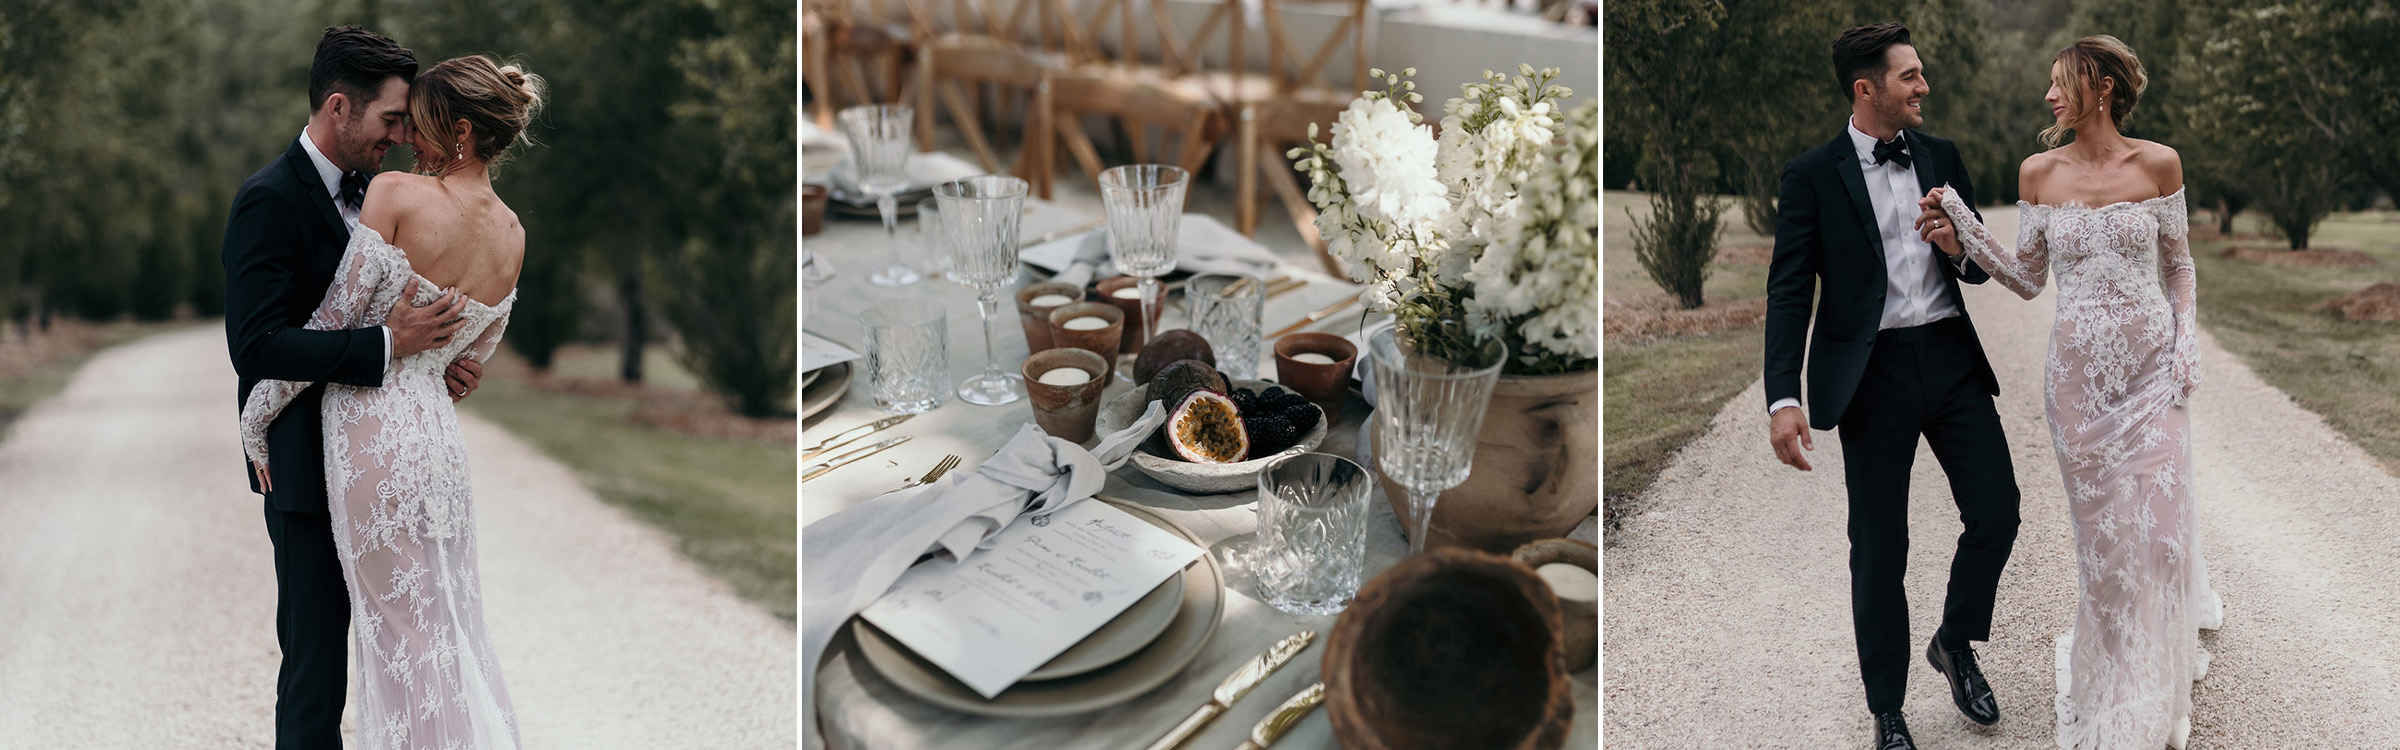 An Australian Villa and Vintage Tableware Set the Tone for This Gorgeous Wedding